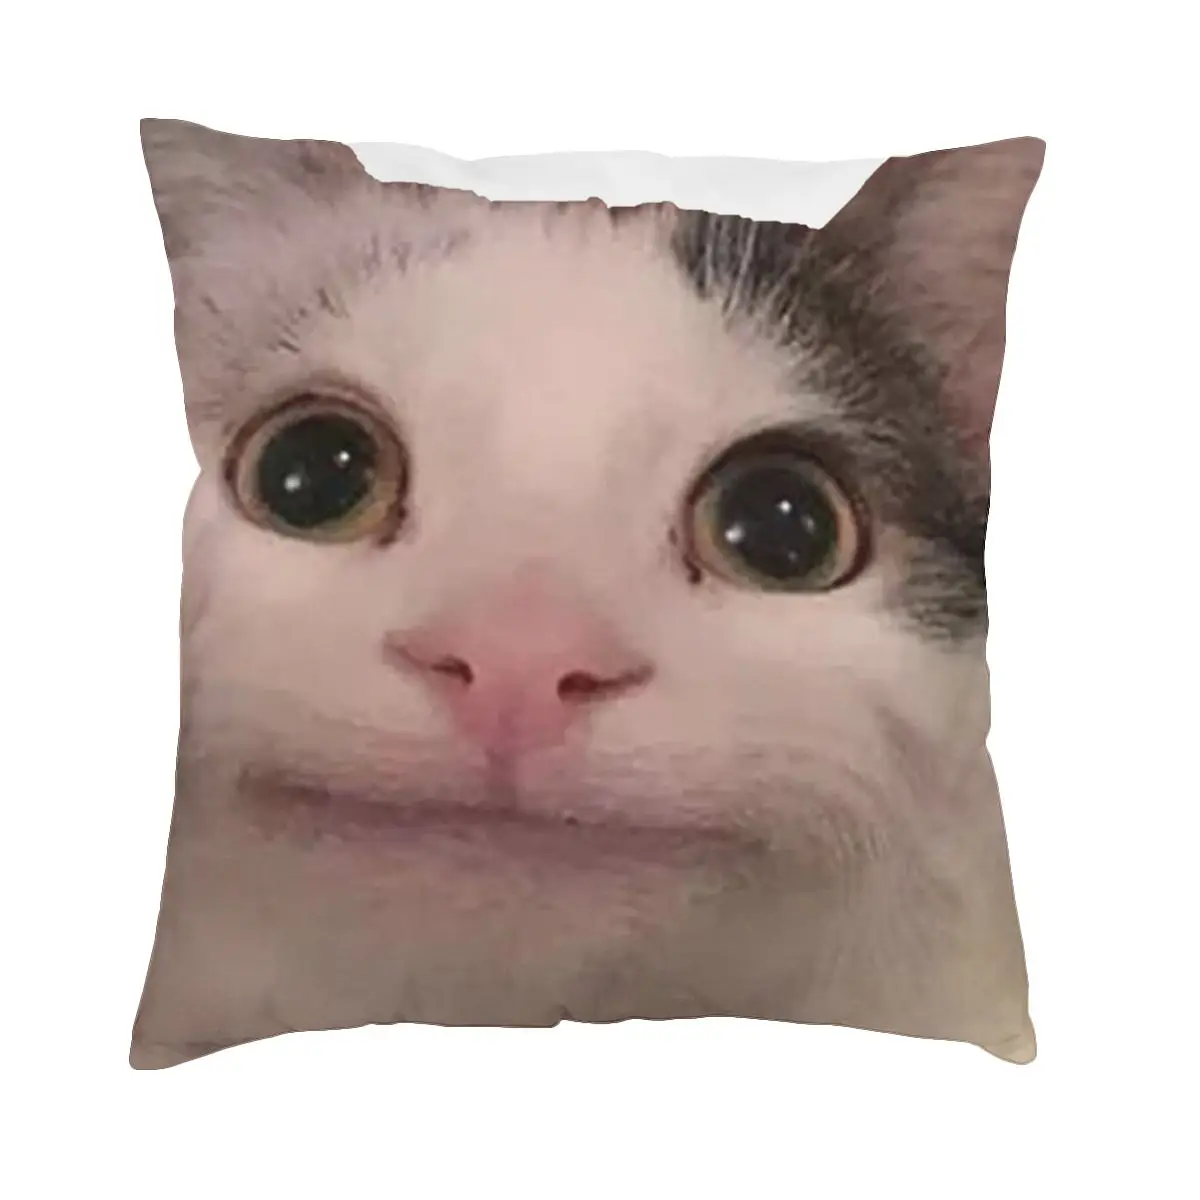 Polite Cat Meme Pillowcase Soft Polyester Cushion Cover Decorations Throw Pillow Case Cover Home Square 18"